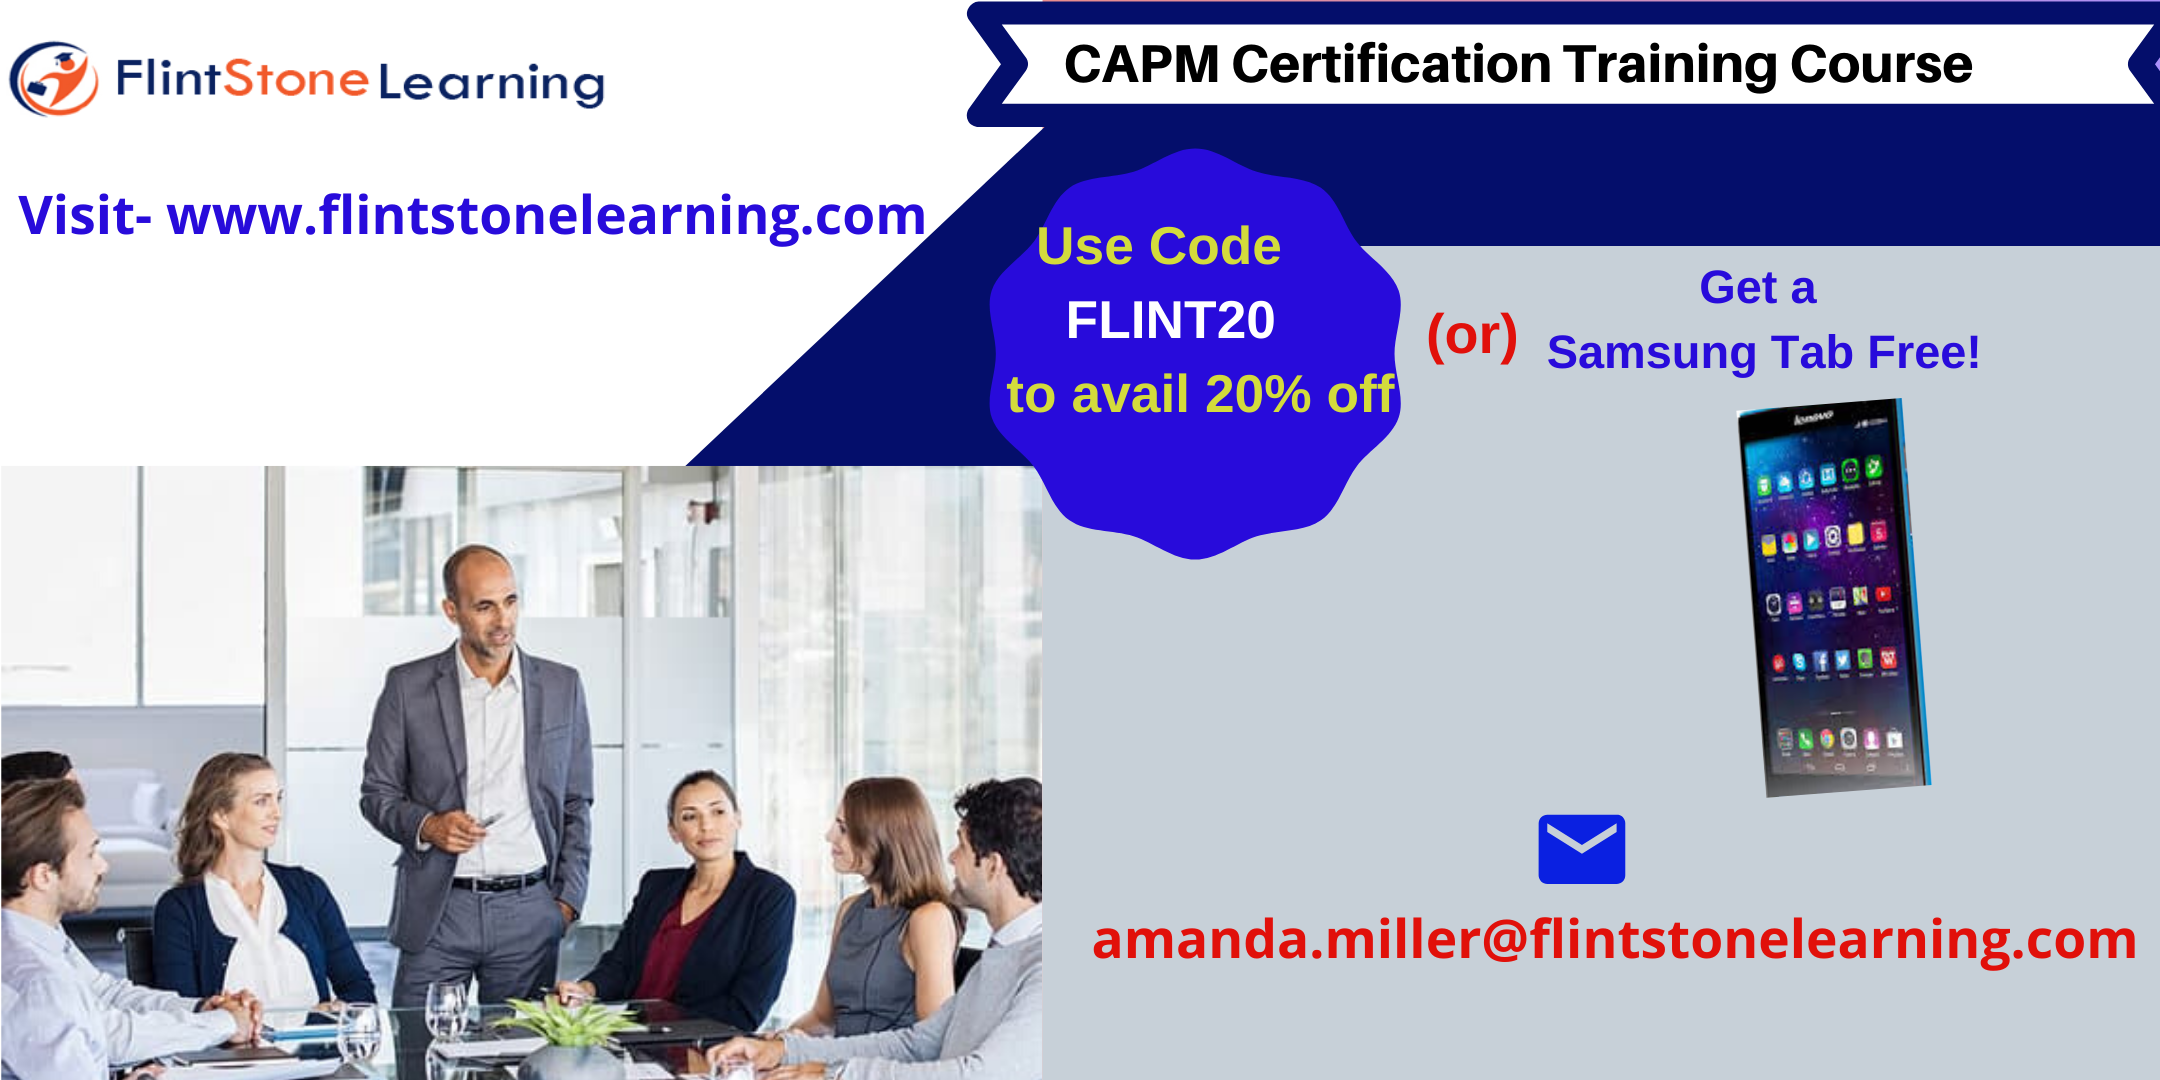 CAPM Certification Training Course in Garland, TX